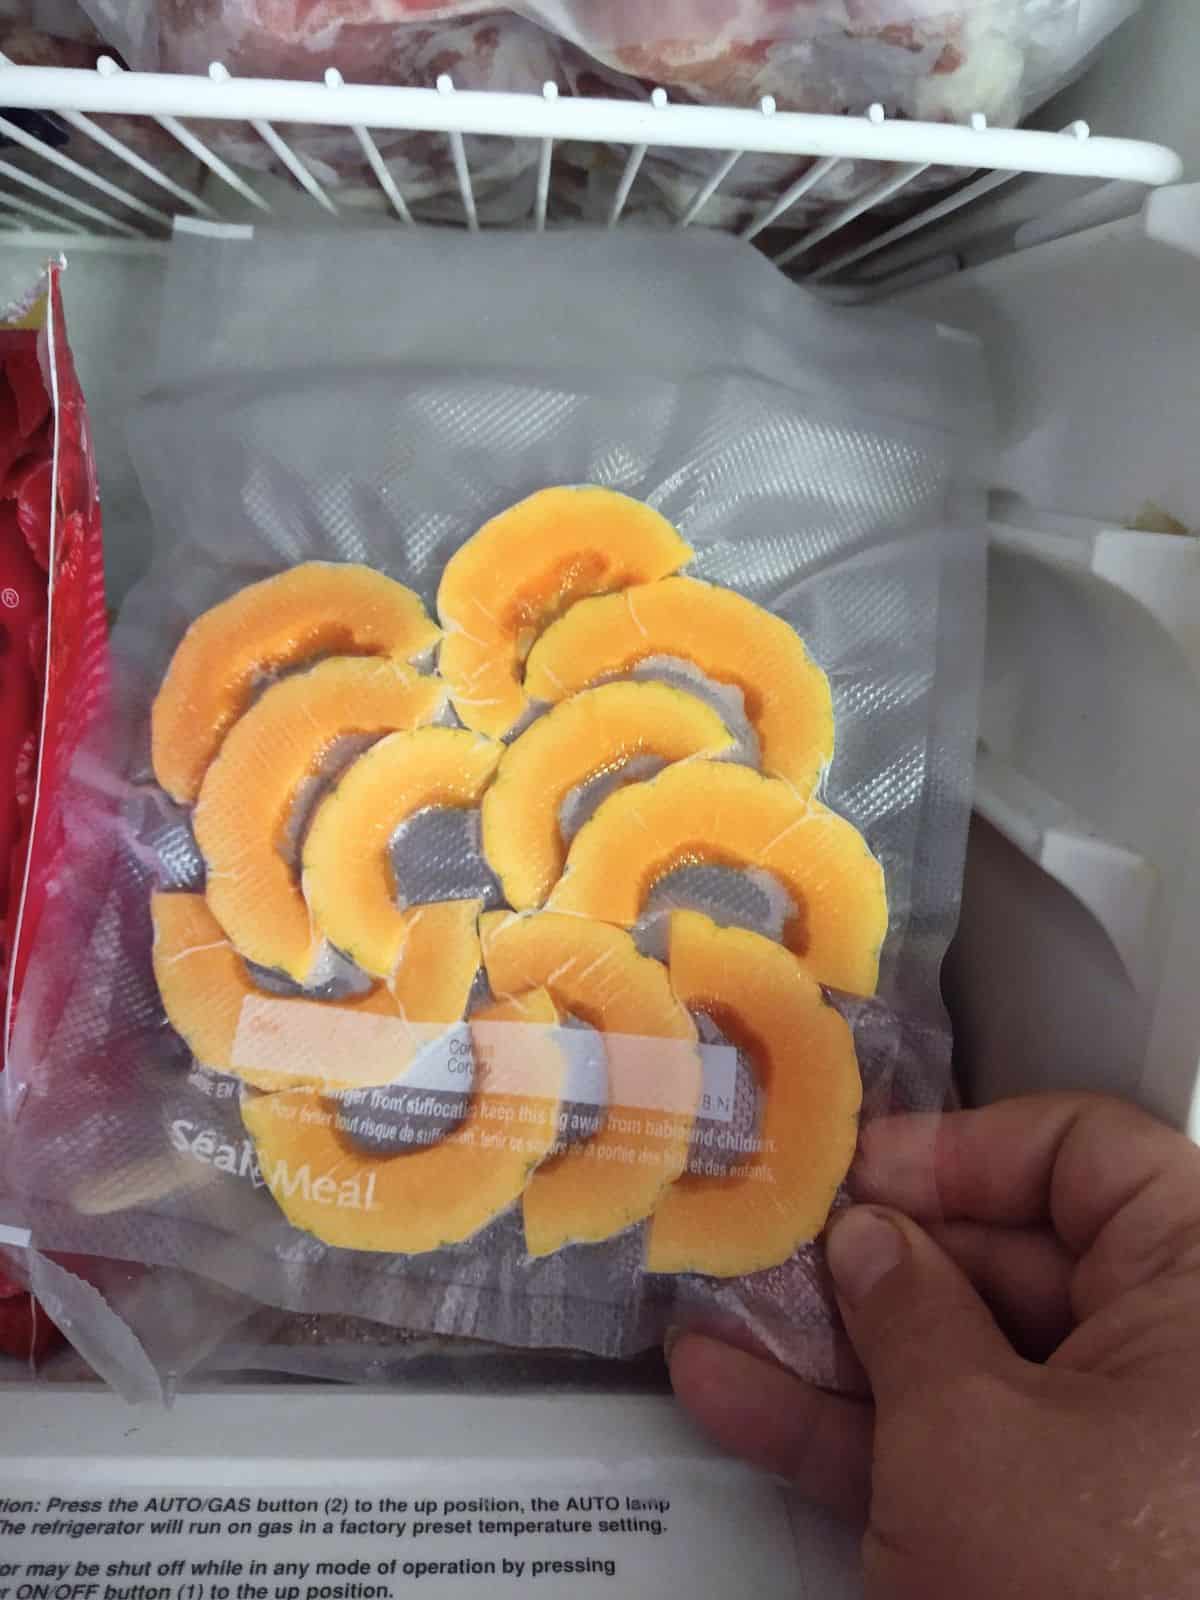 A vacuum sealed bag filled with 11 half moon slices of Delicata squash with the skins still on. The bag is being held upwards in front of an open freezer.